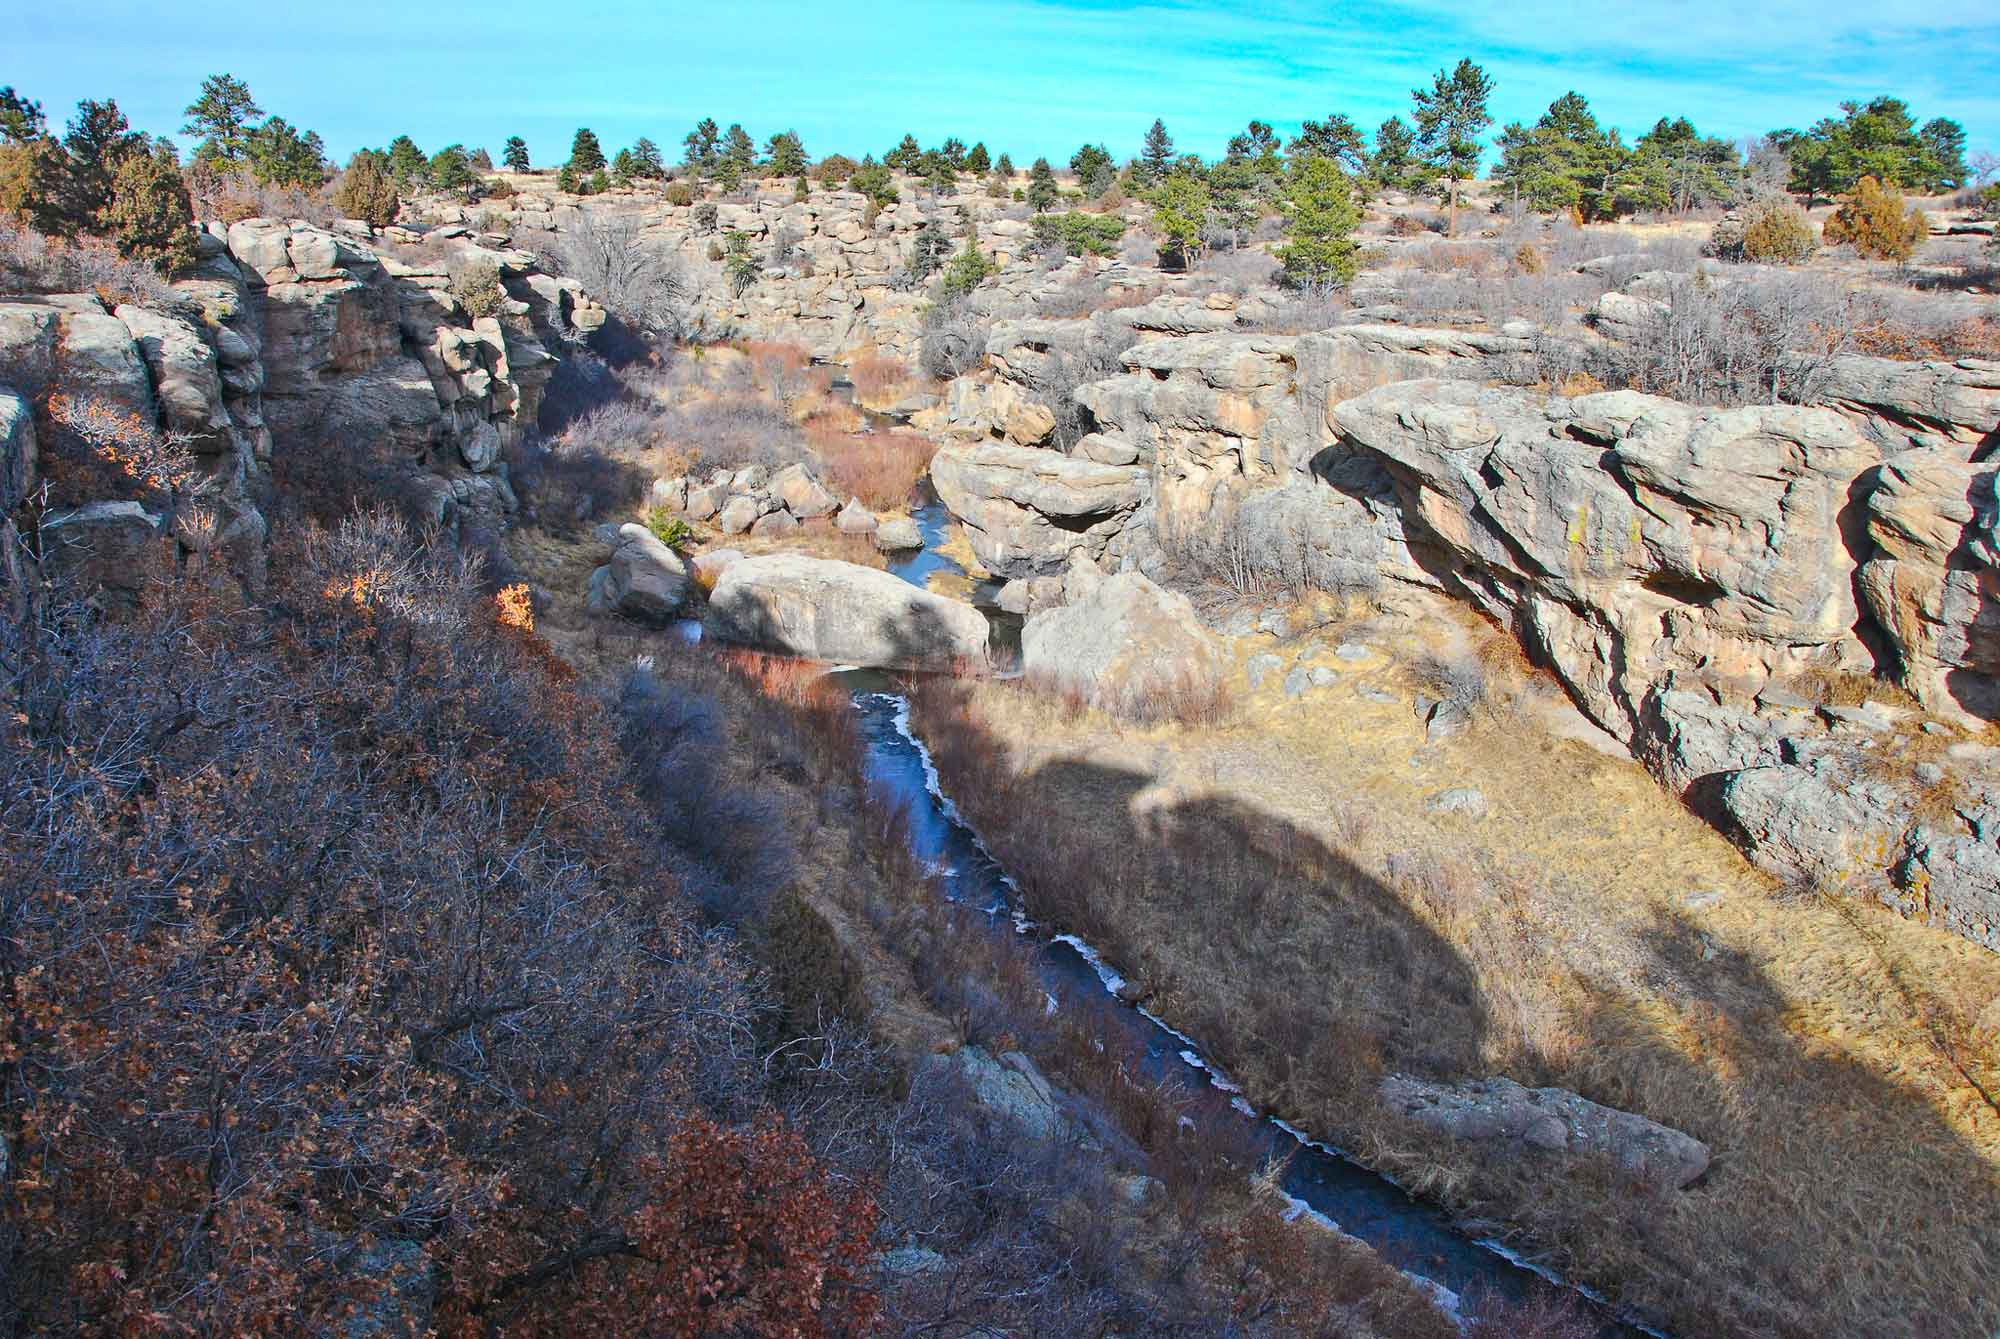 Photograph of Castlewood Canyon State Park in Colorado.